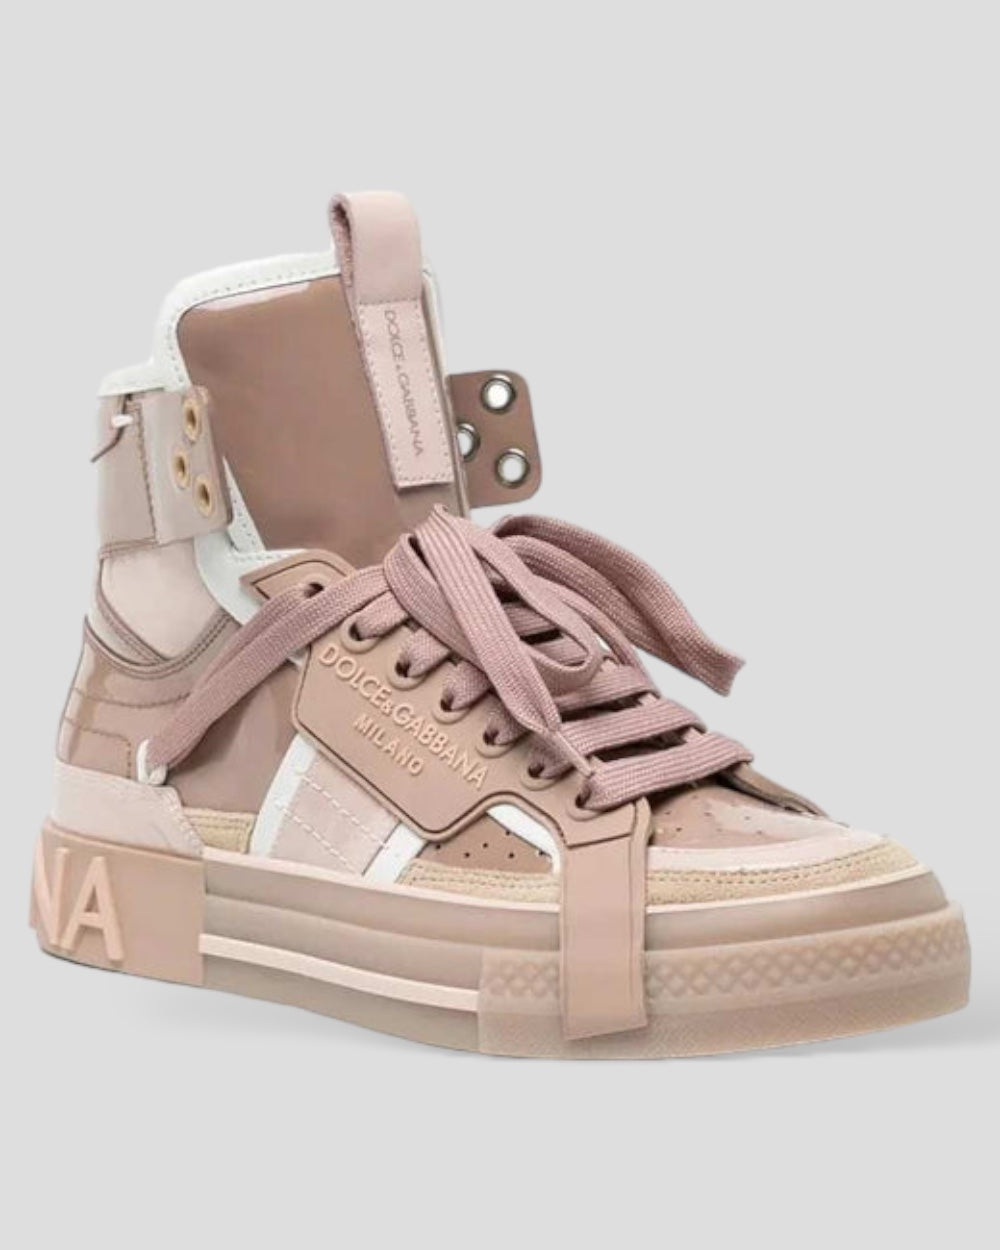 Dolce & Gabbana Nude Pink Leather High Top Sneakers Shoes